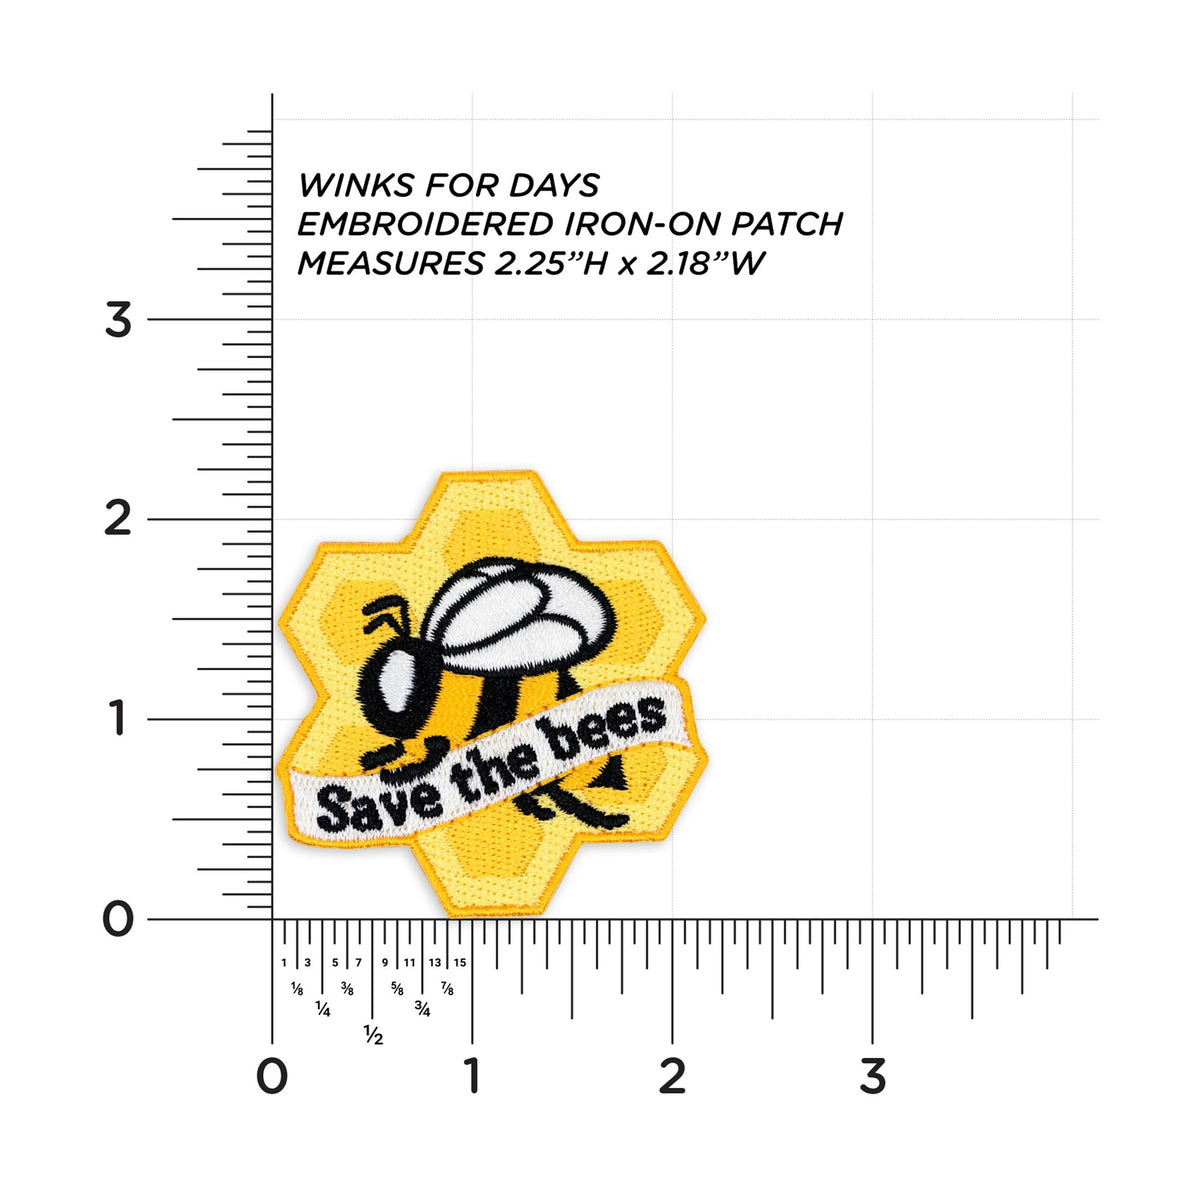 Save The Bees measurements